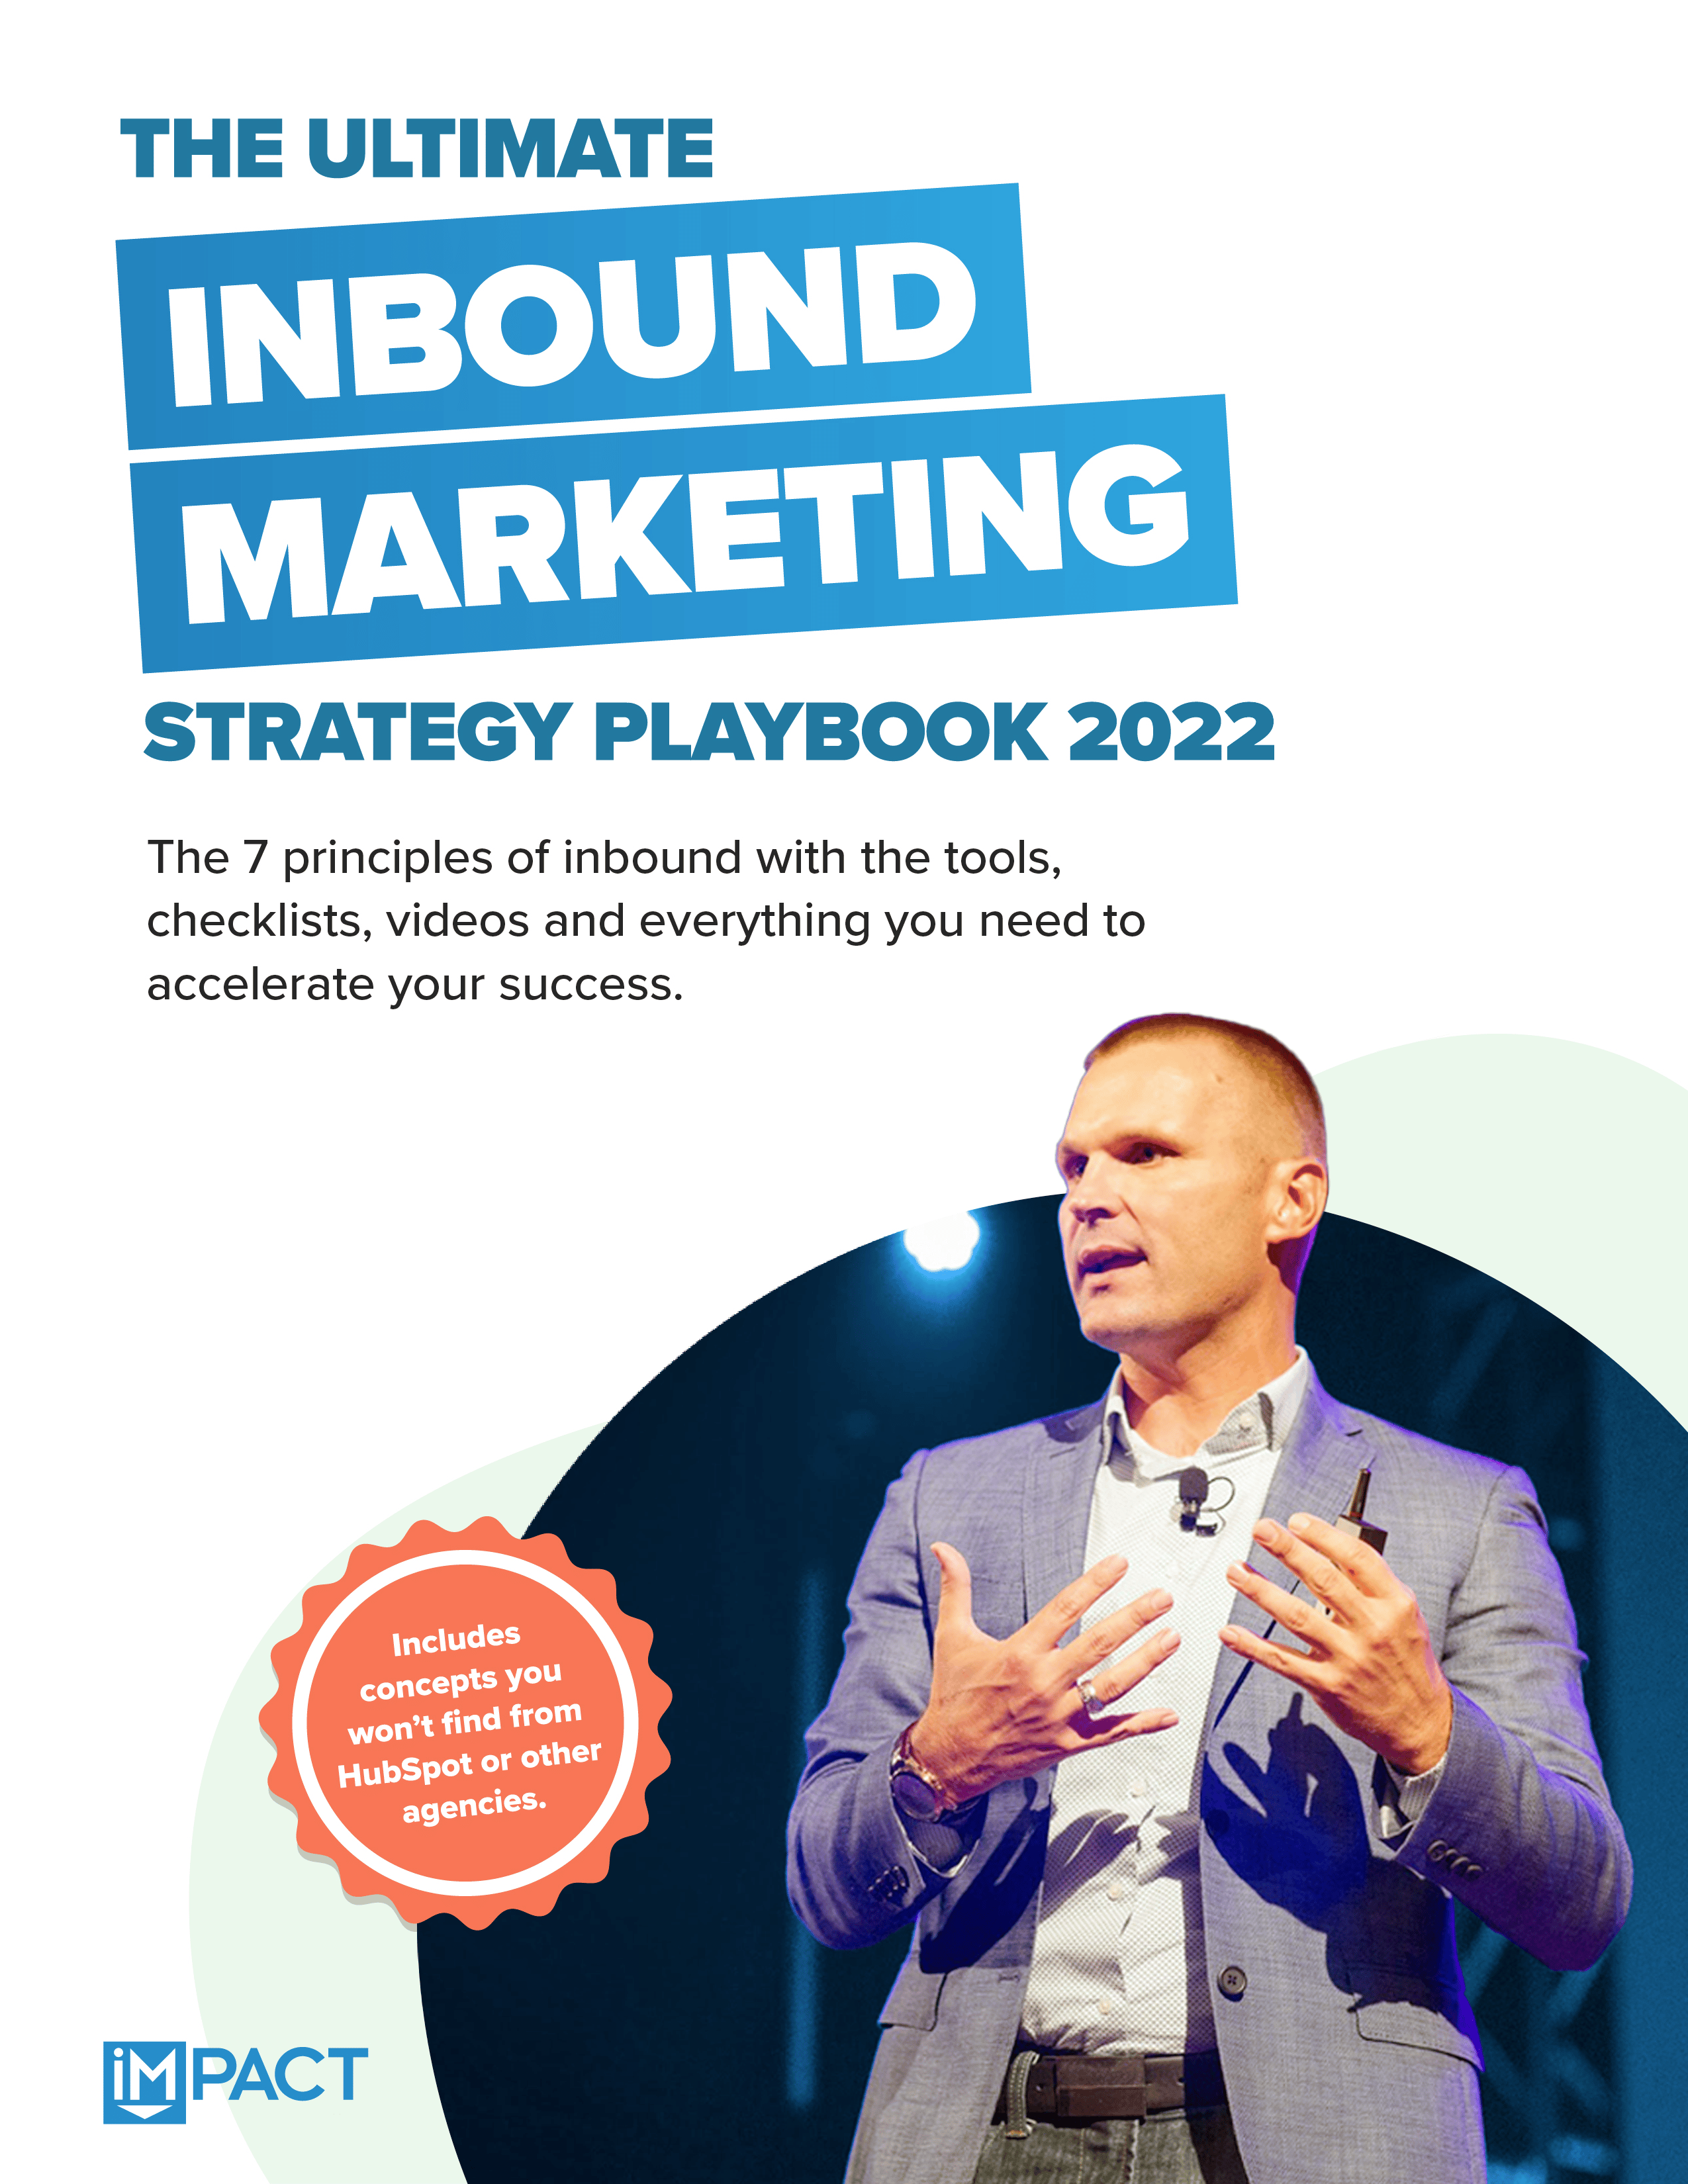 [Playbook] Ultimate Inbound Marketing Strategy Cover